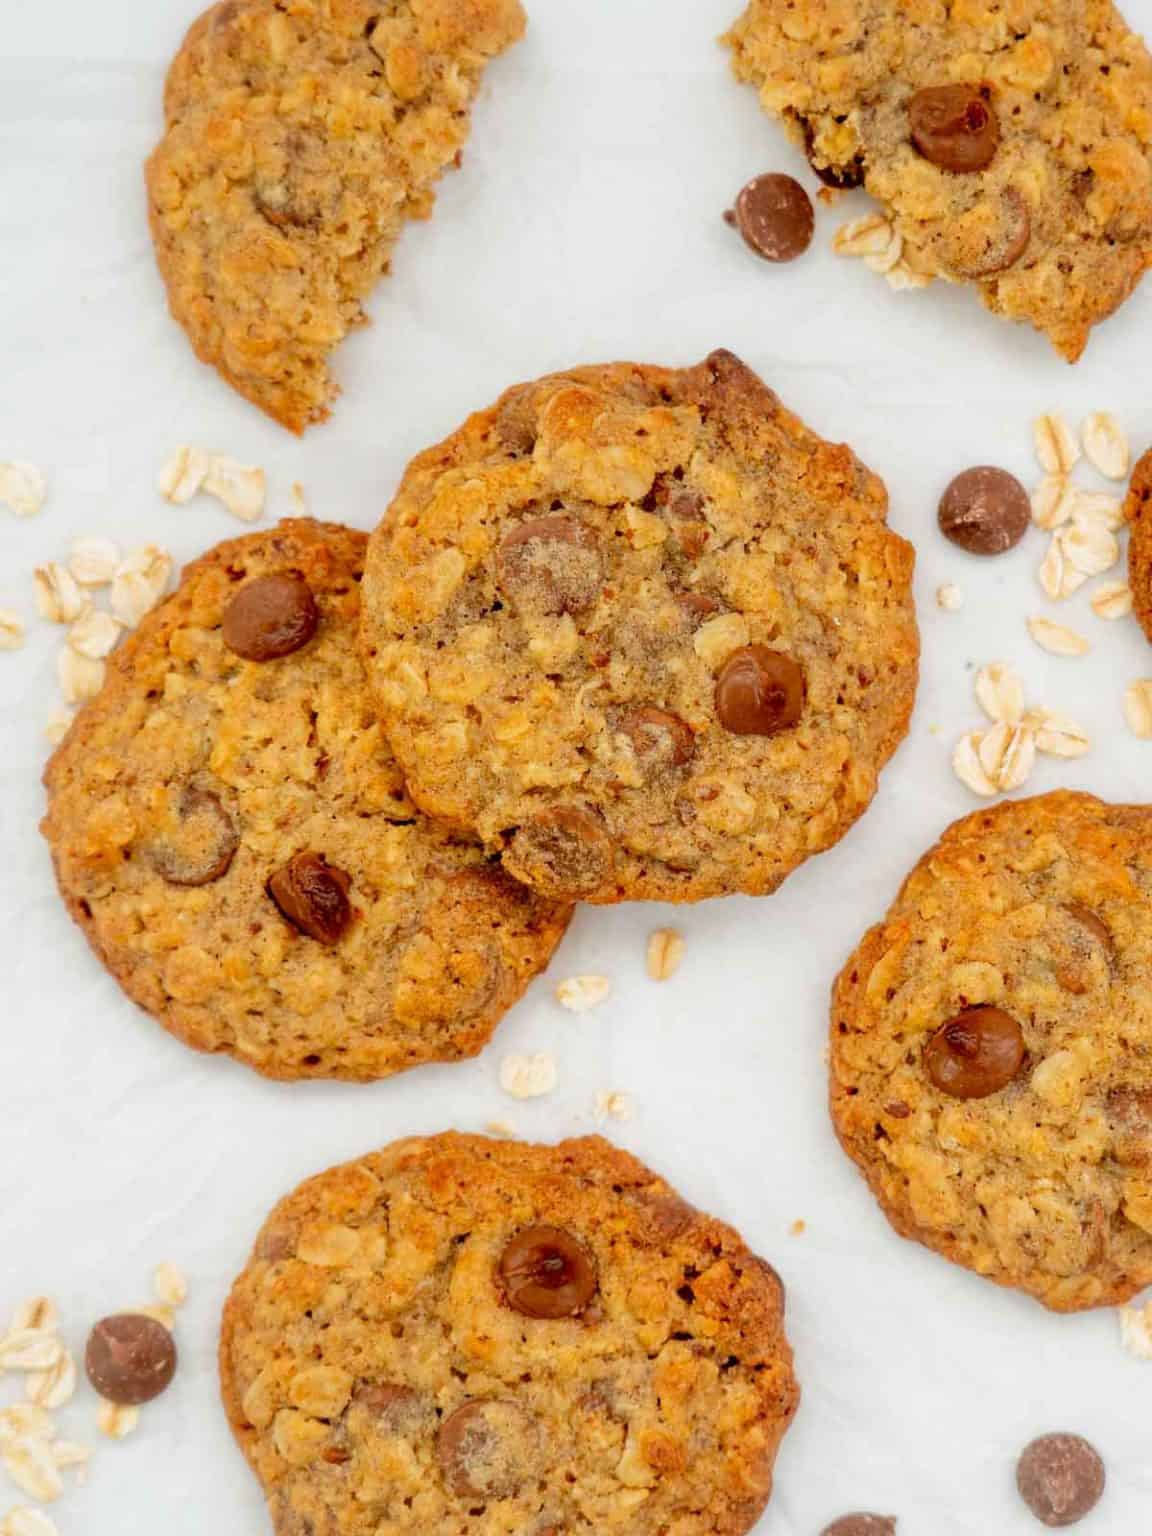 Lactation Cookies Recipe - My Kids Lick The Bowl